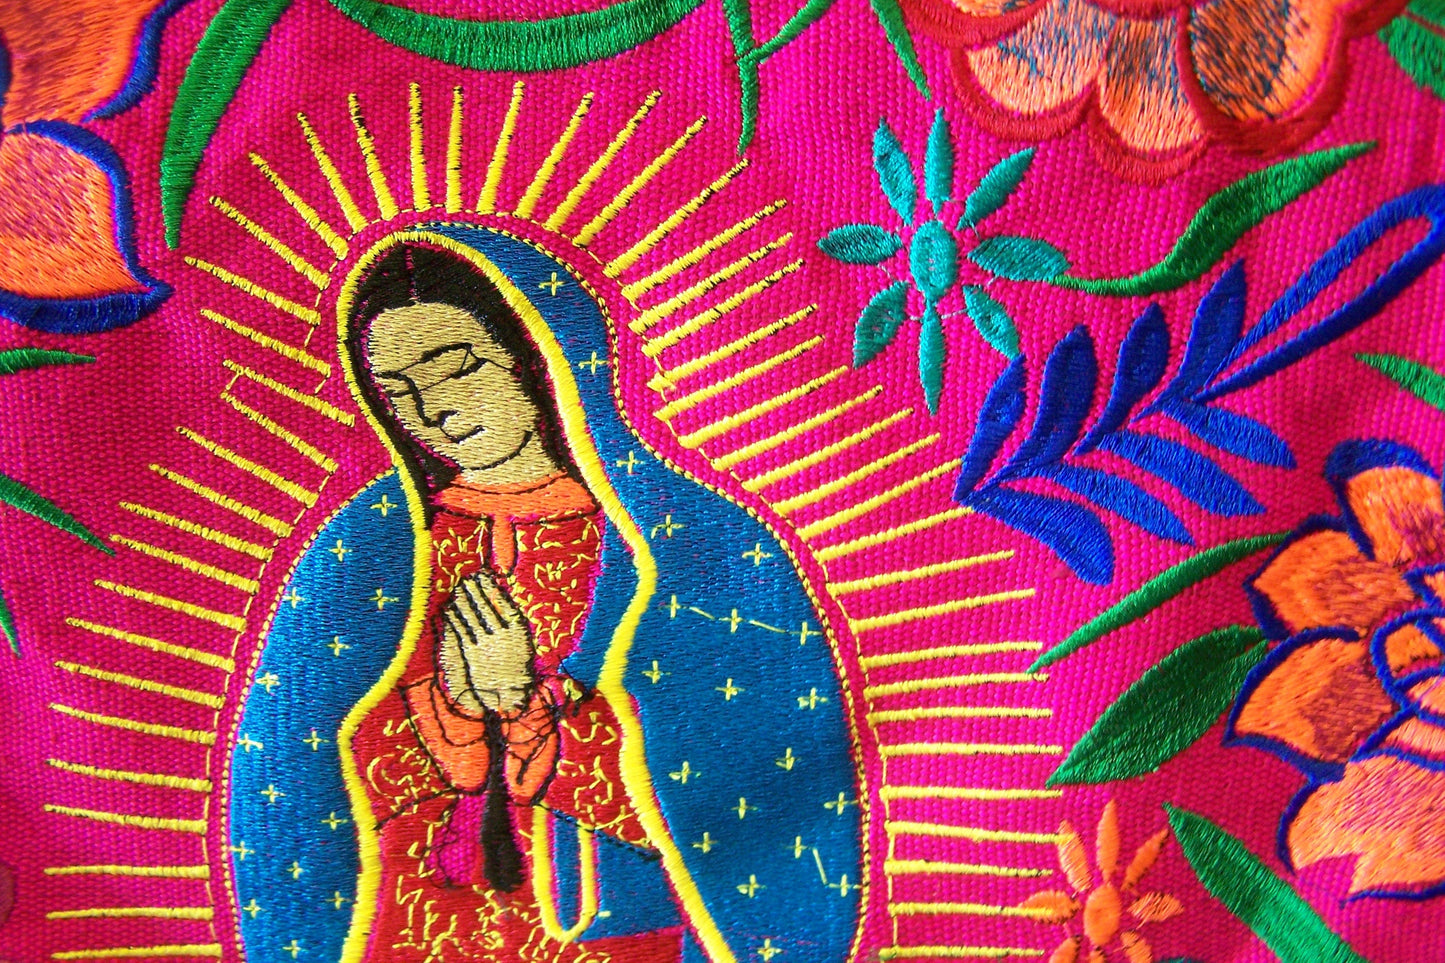 Virgin of Guadalupe Large Embroidered Leather Shoulder Bag Purse, Lined Interior, 2 Zipper Pouches - Pink